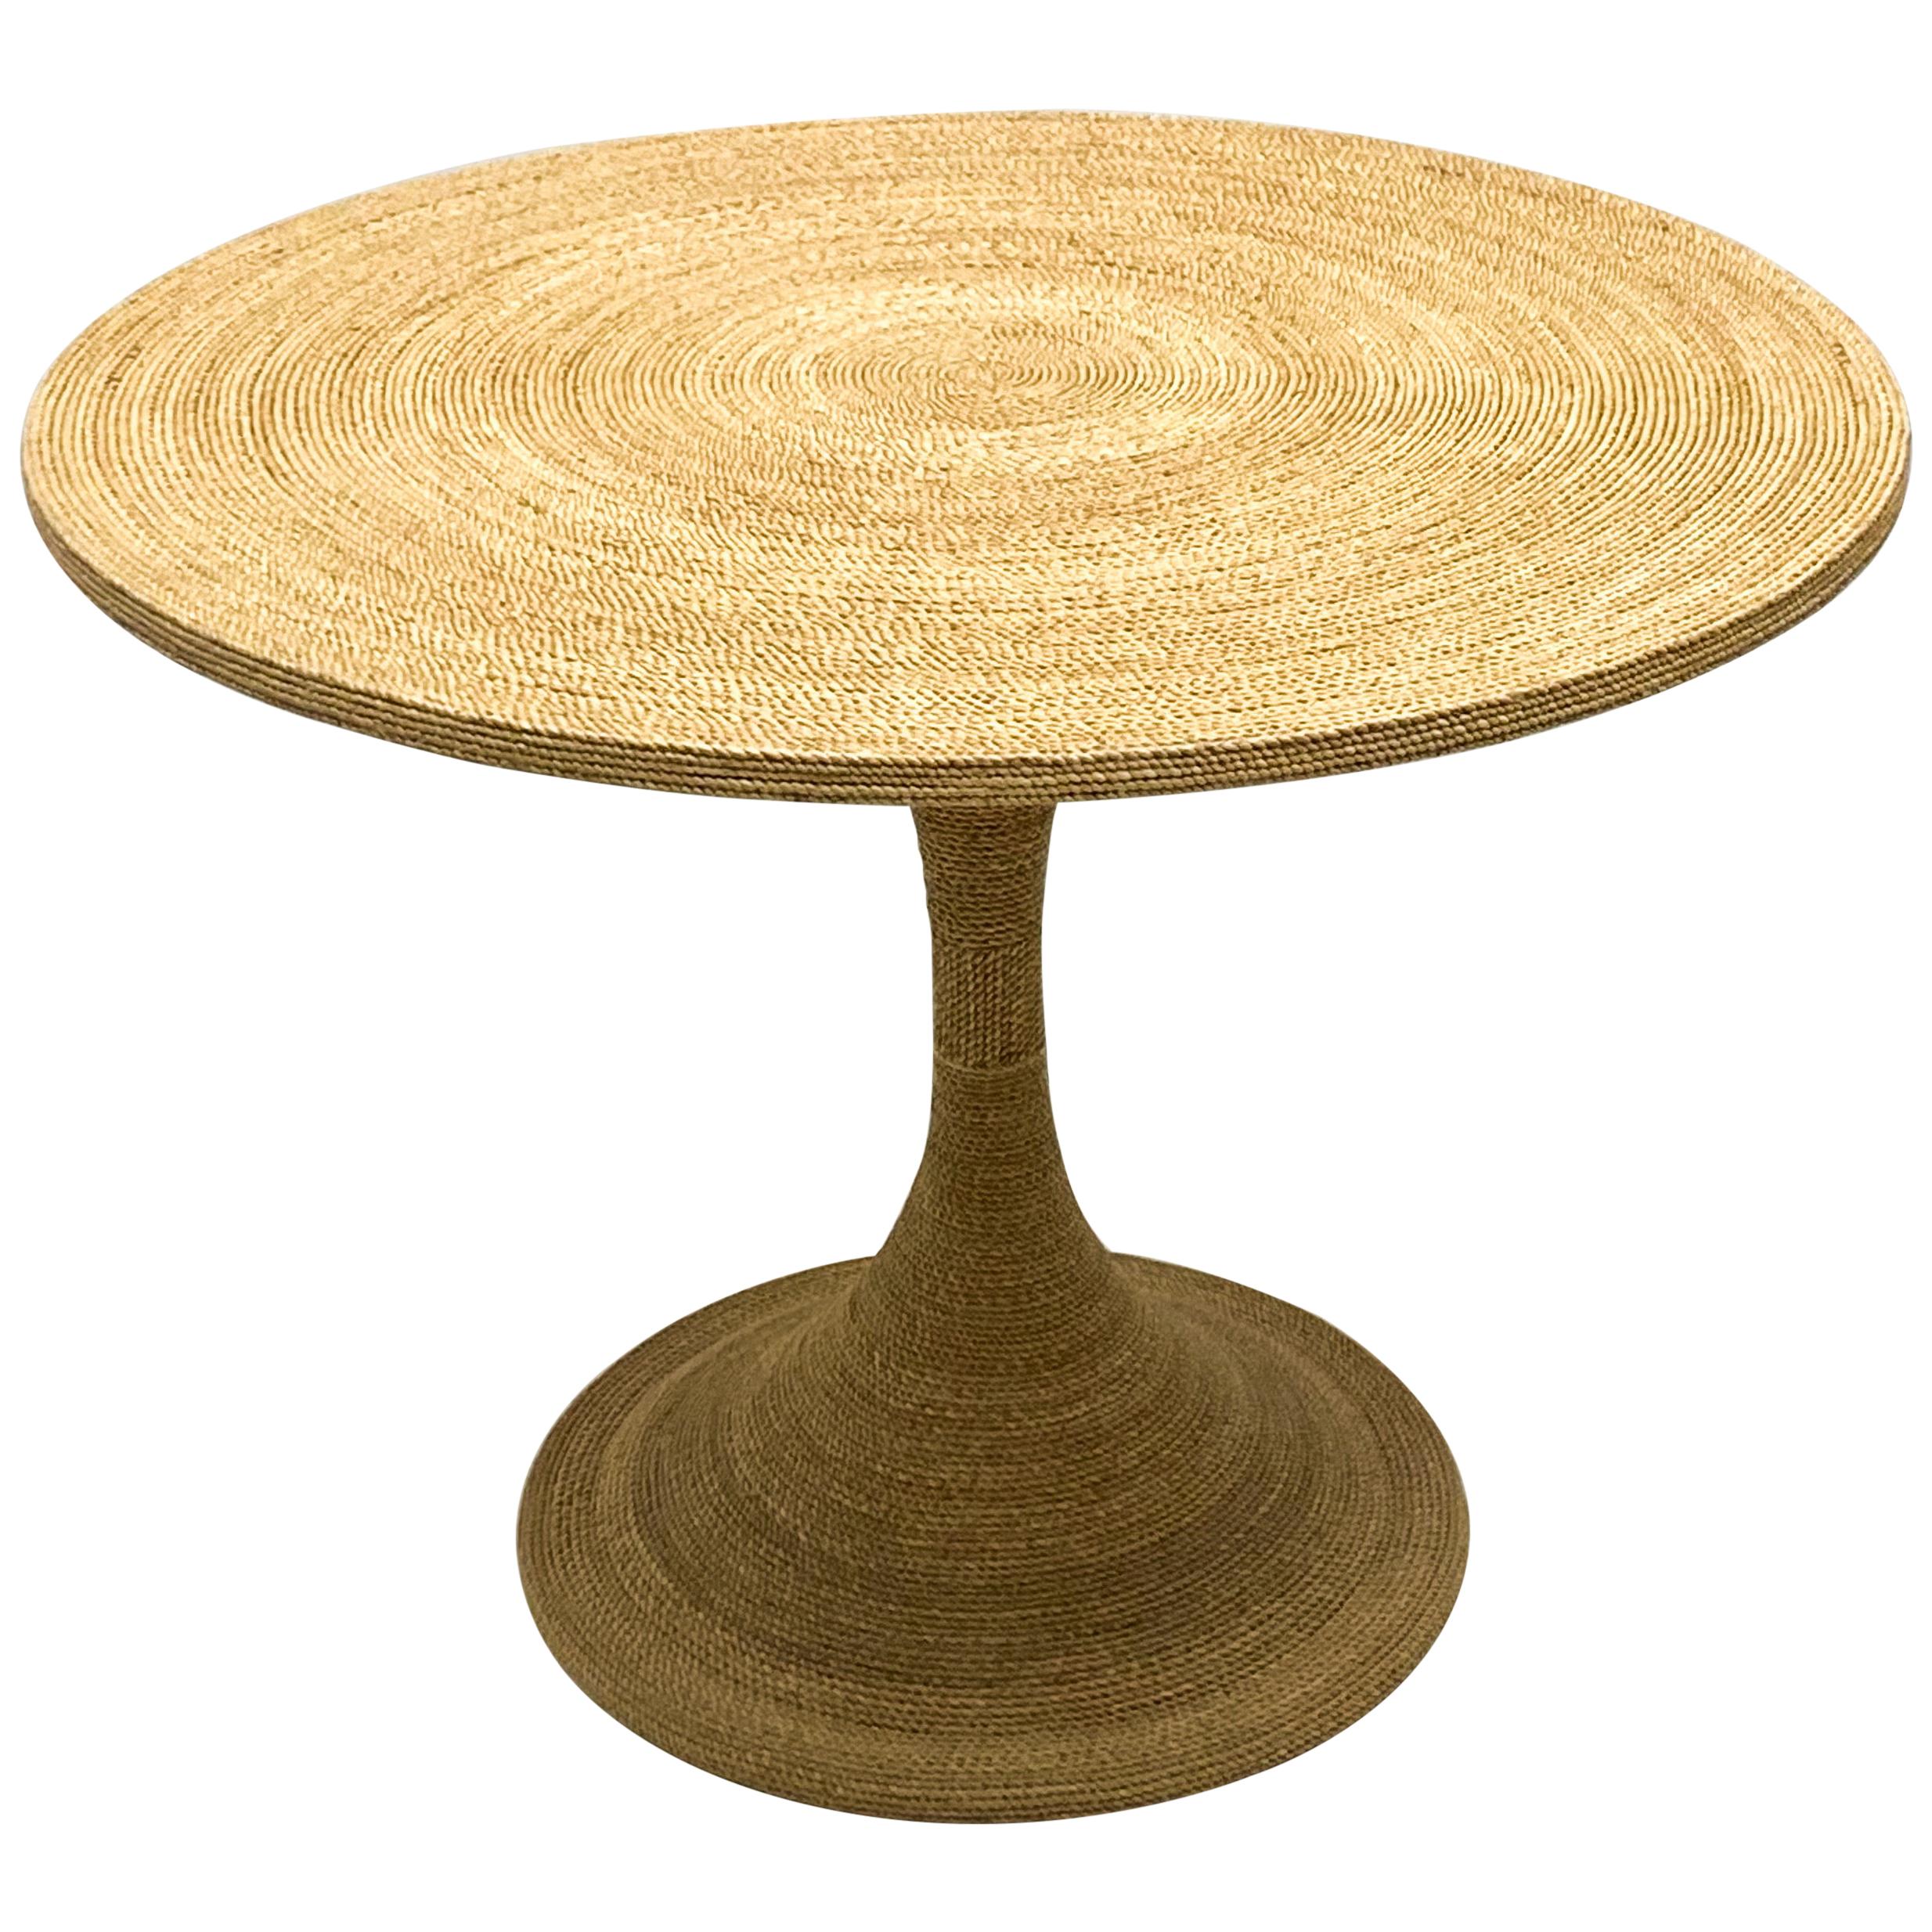 1970s Modern Tulip Style Woven Seagrass Center Table